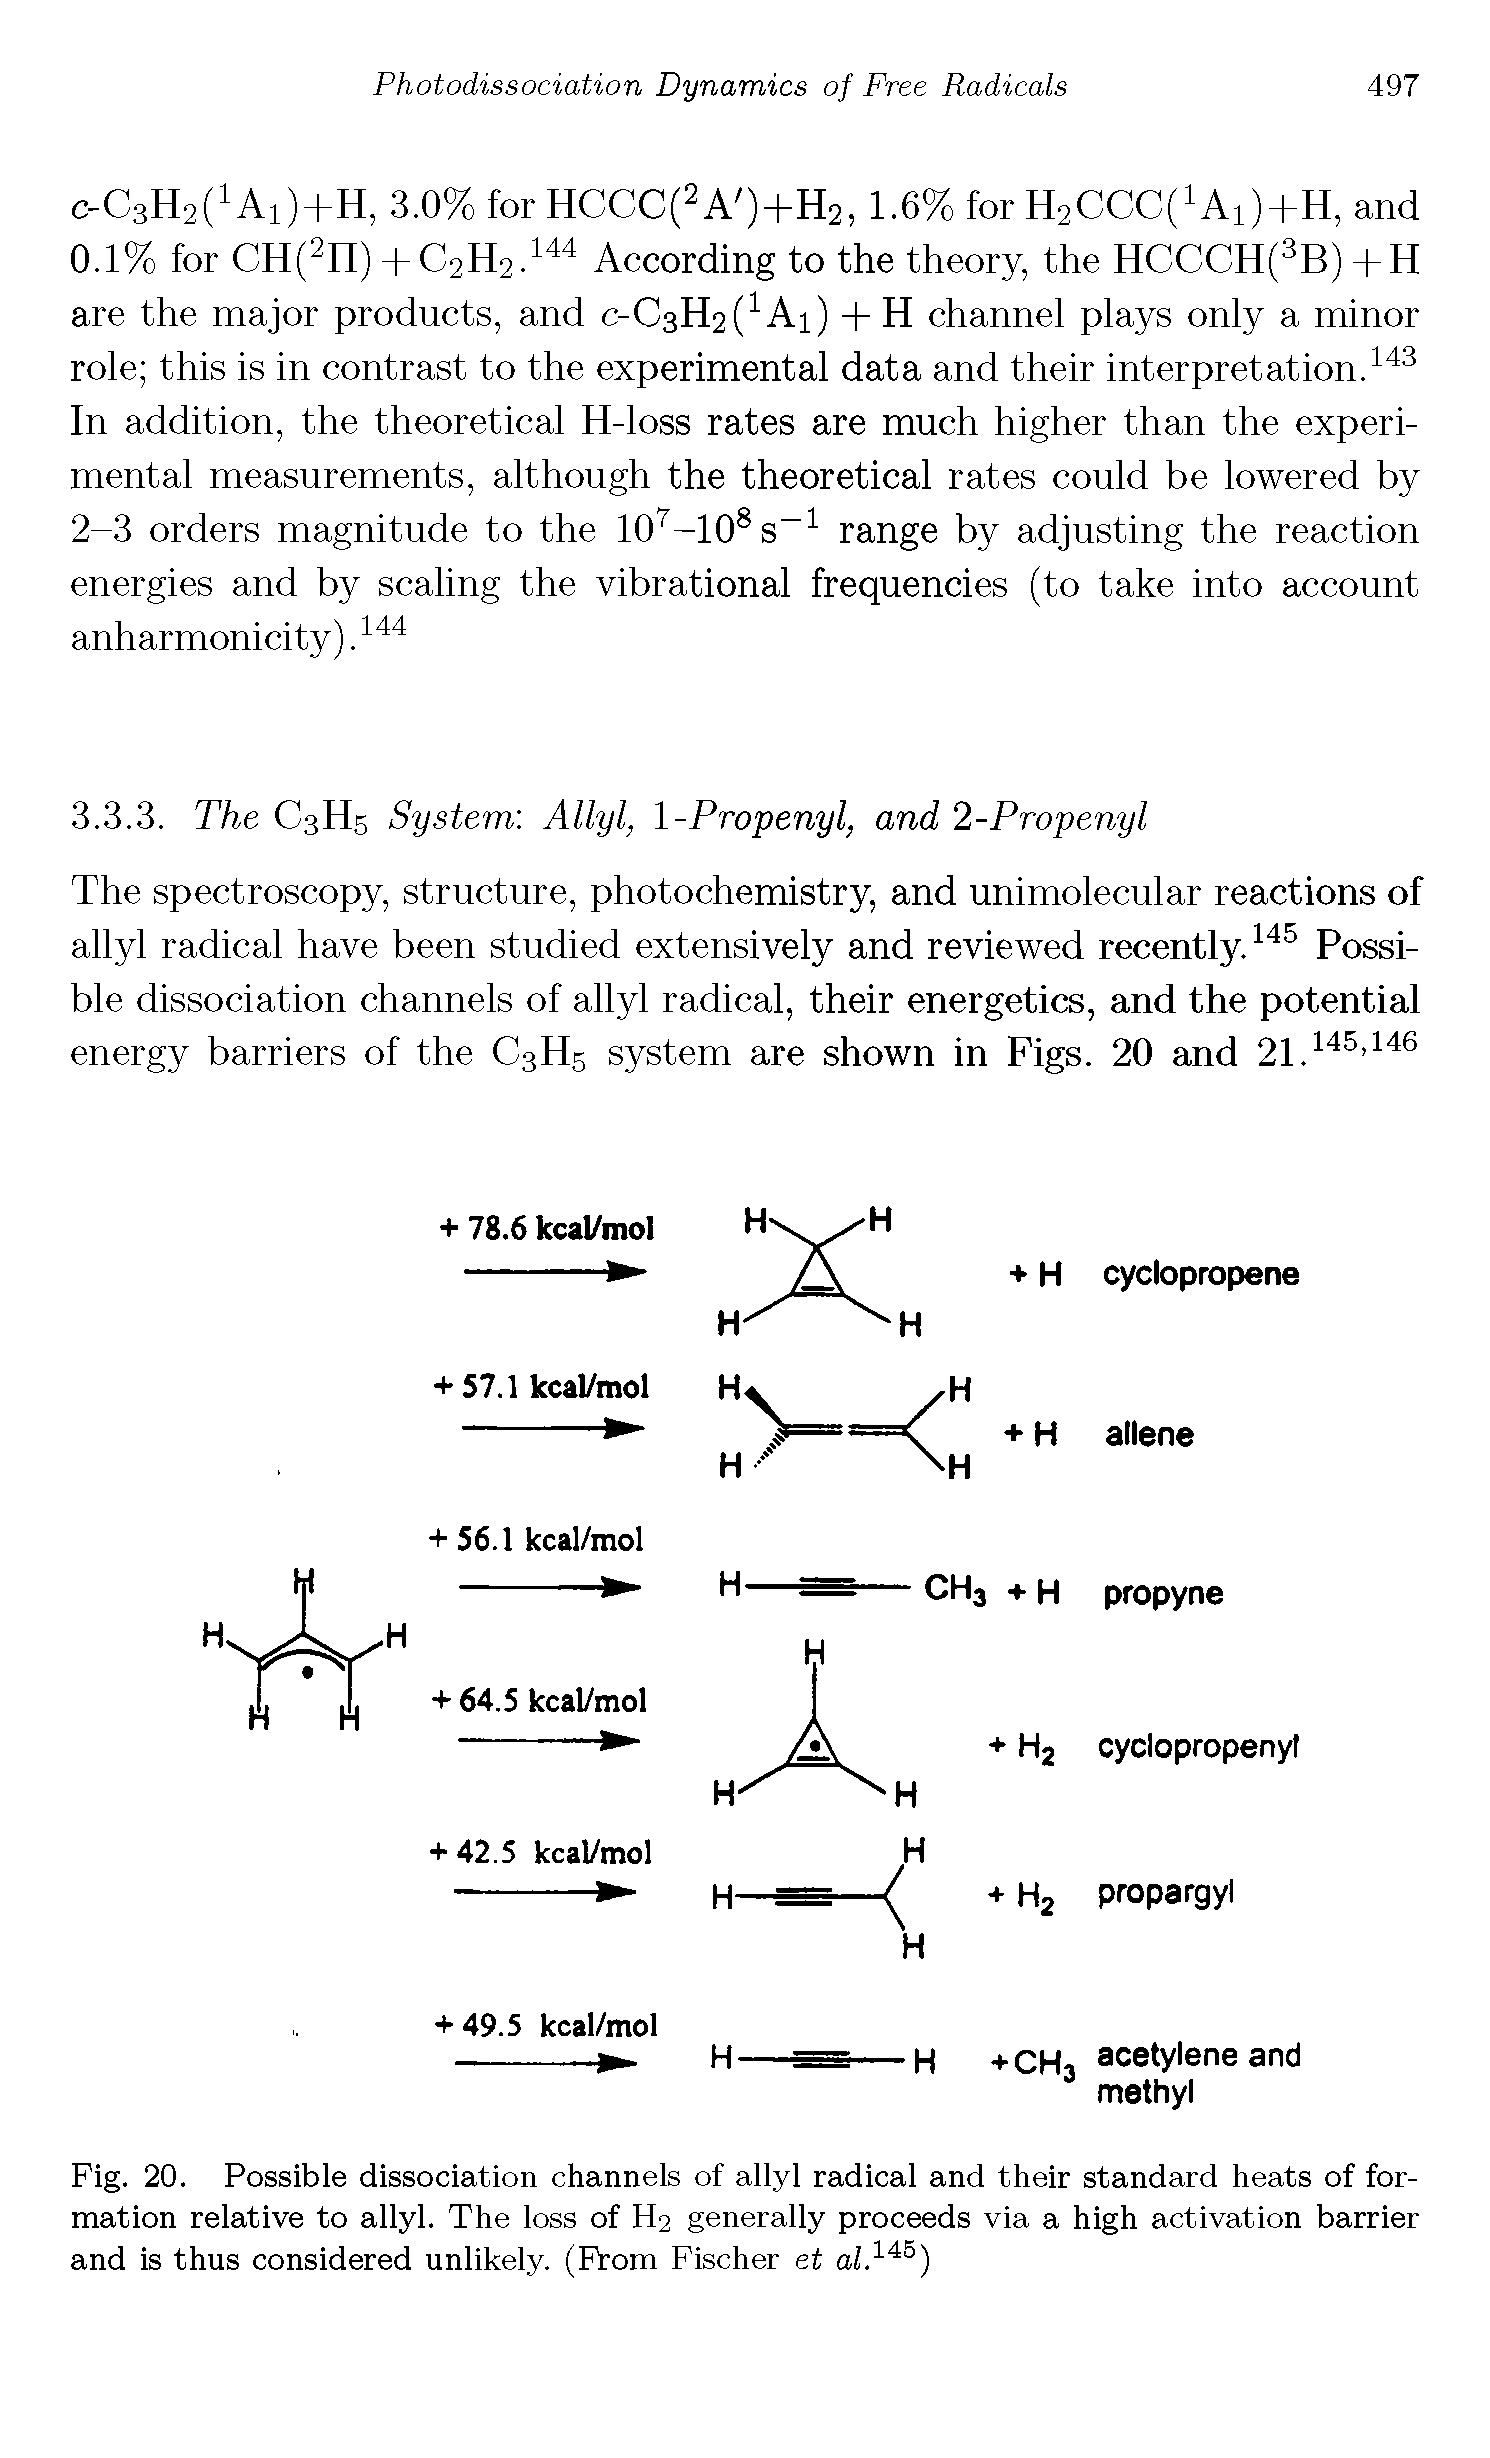 Fig. 20. Possible dissociation channels of allyl radical and their standard heats of formation relative to allyl. The loss of H2 generally proceeds via a high activation barrier and is thus considered unlikely. (From Fischer et ai.14B)...